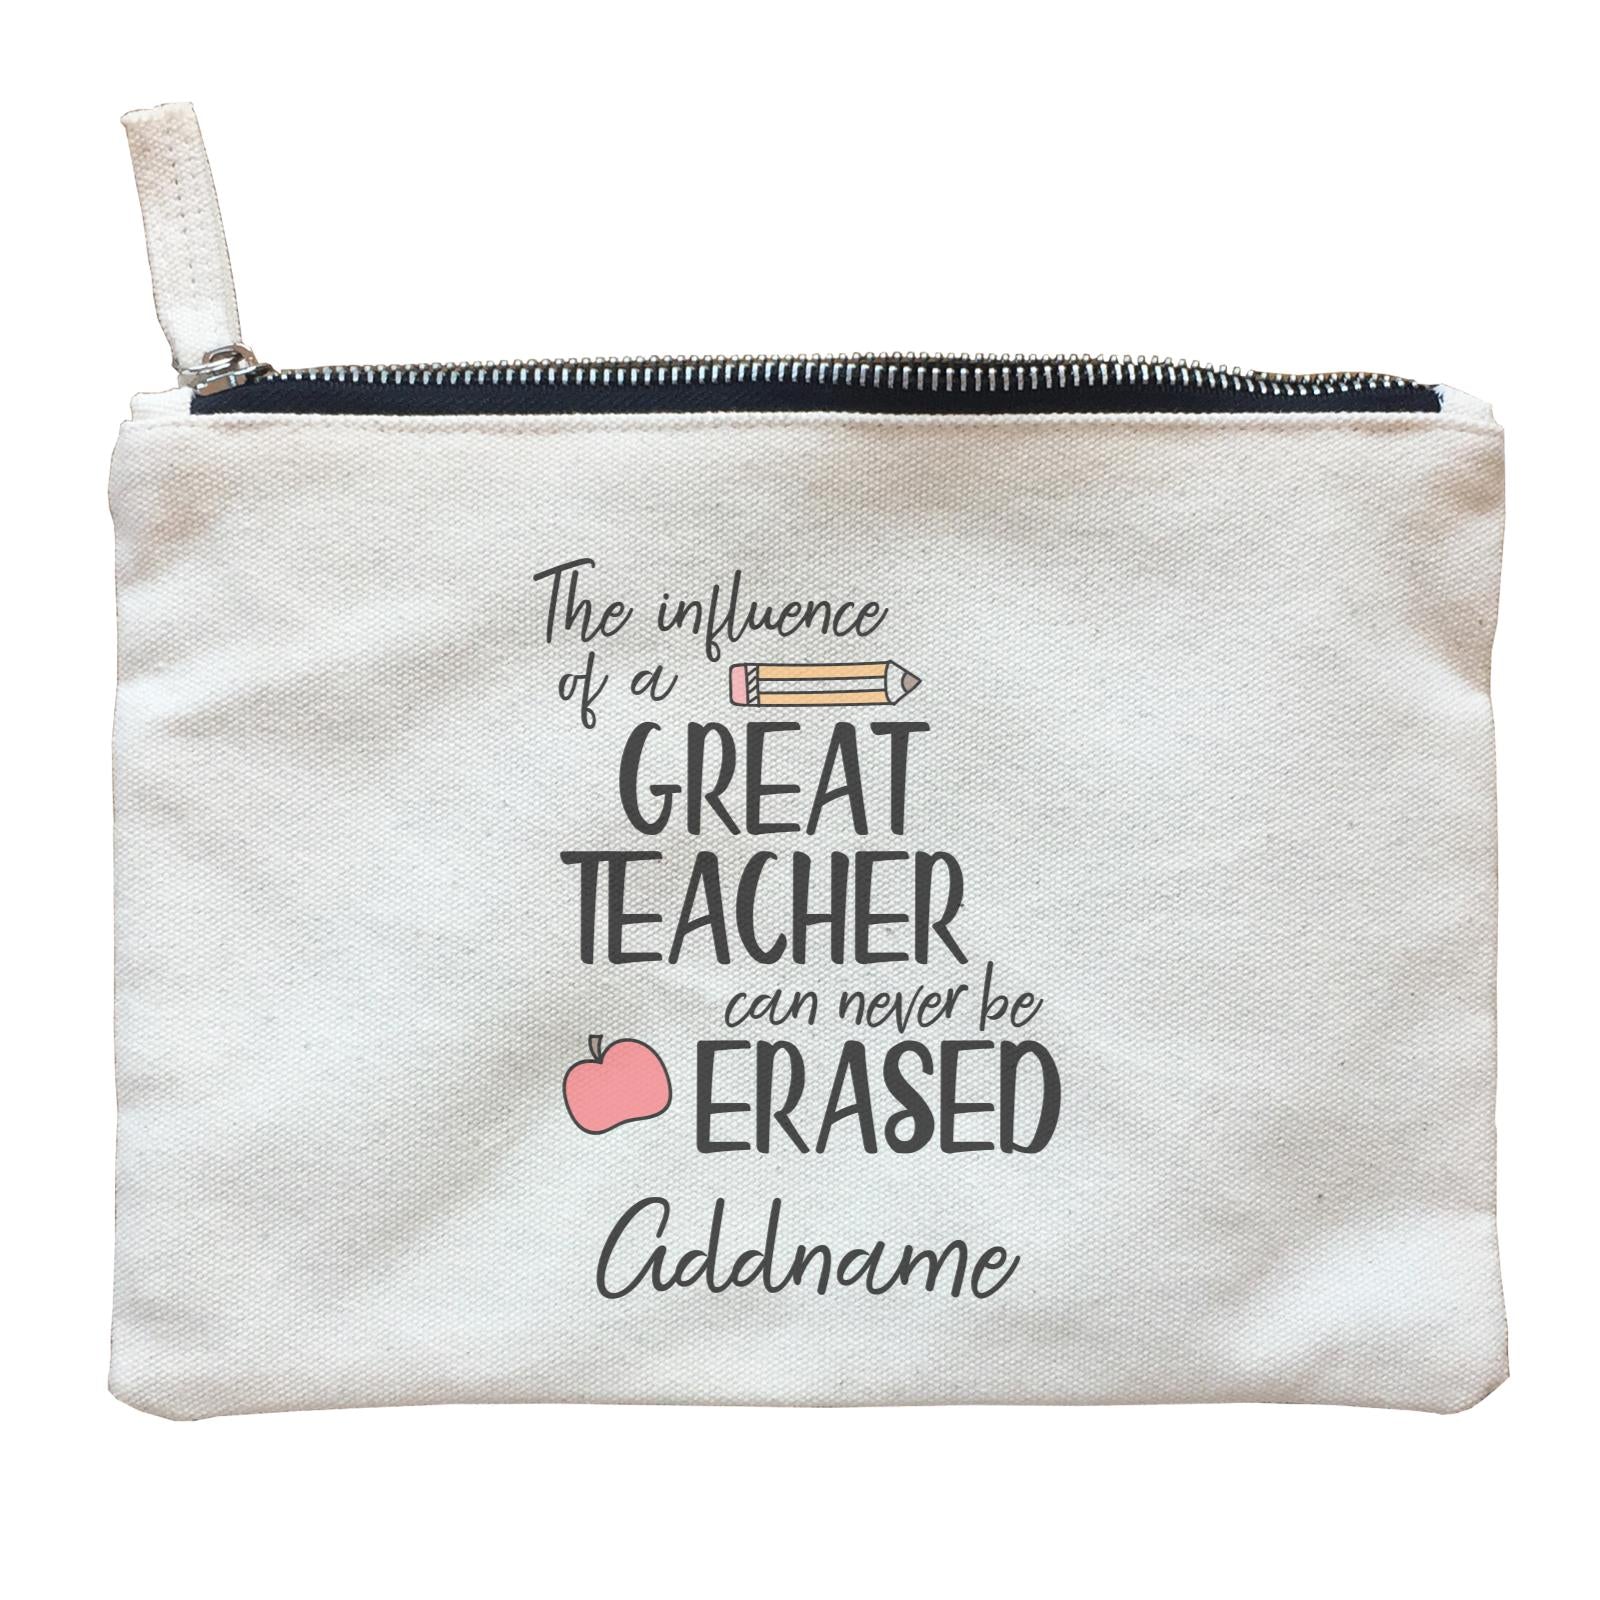 Teacher Quotes The Influence Of A Great Teacher Can Never Be Erased Addname Zipper Pouch